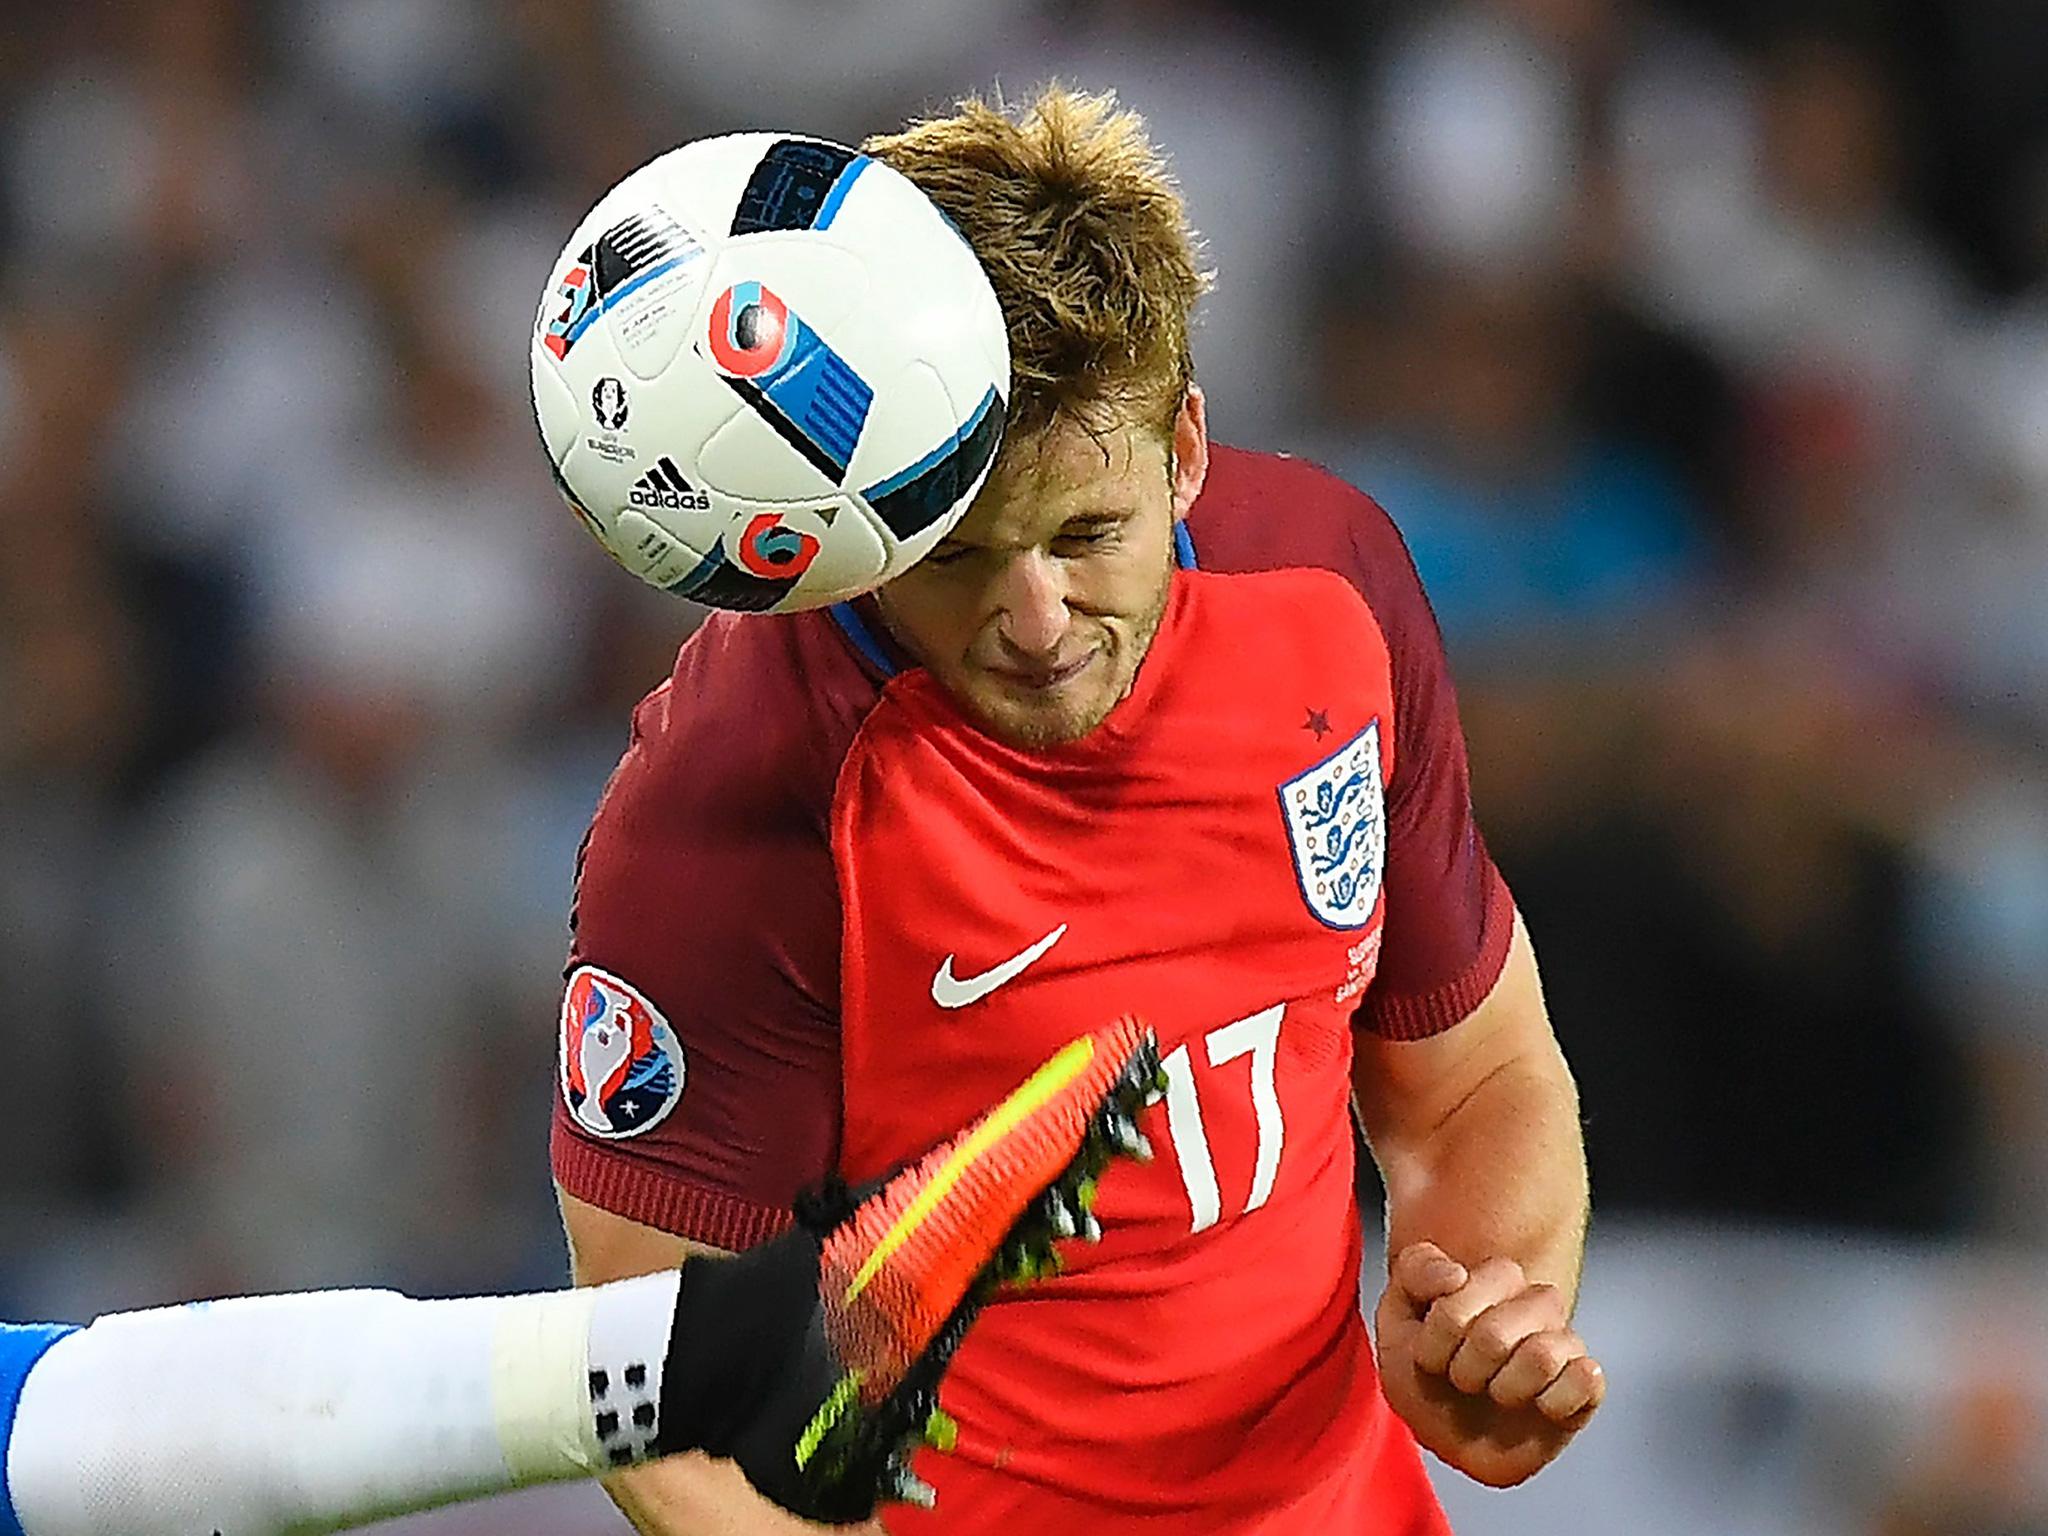 &#13;
Eric Dier has been Mark Ogden's, Ian Herbert's and Glenn Moore's young player of Euro 2016 (Getty)&#13;